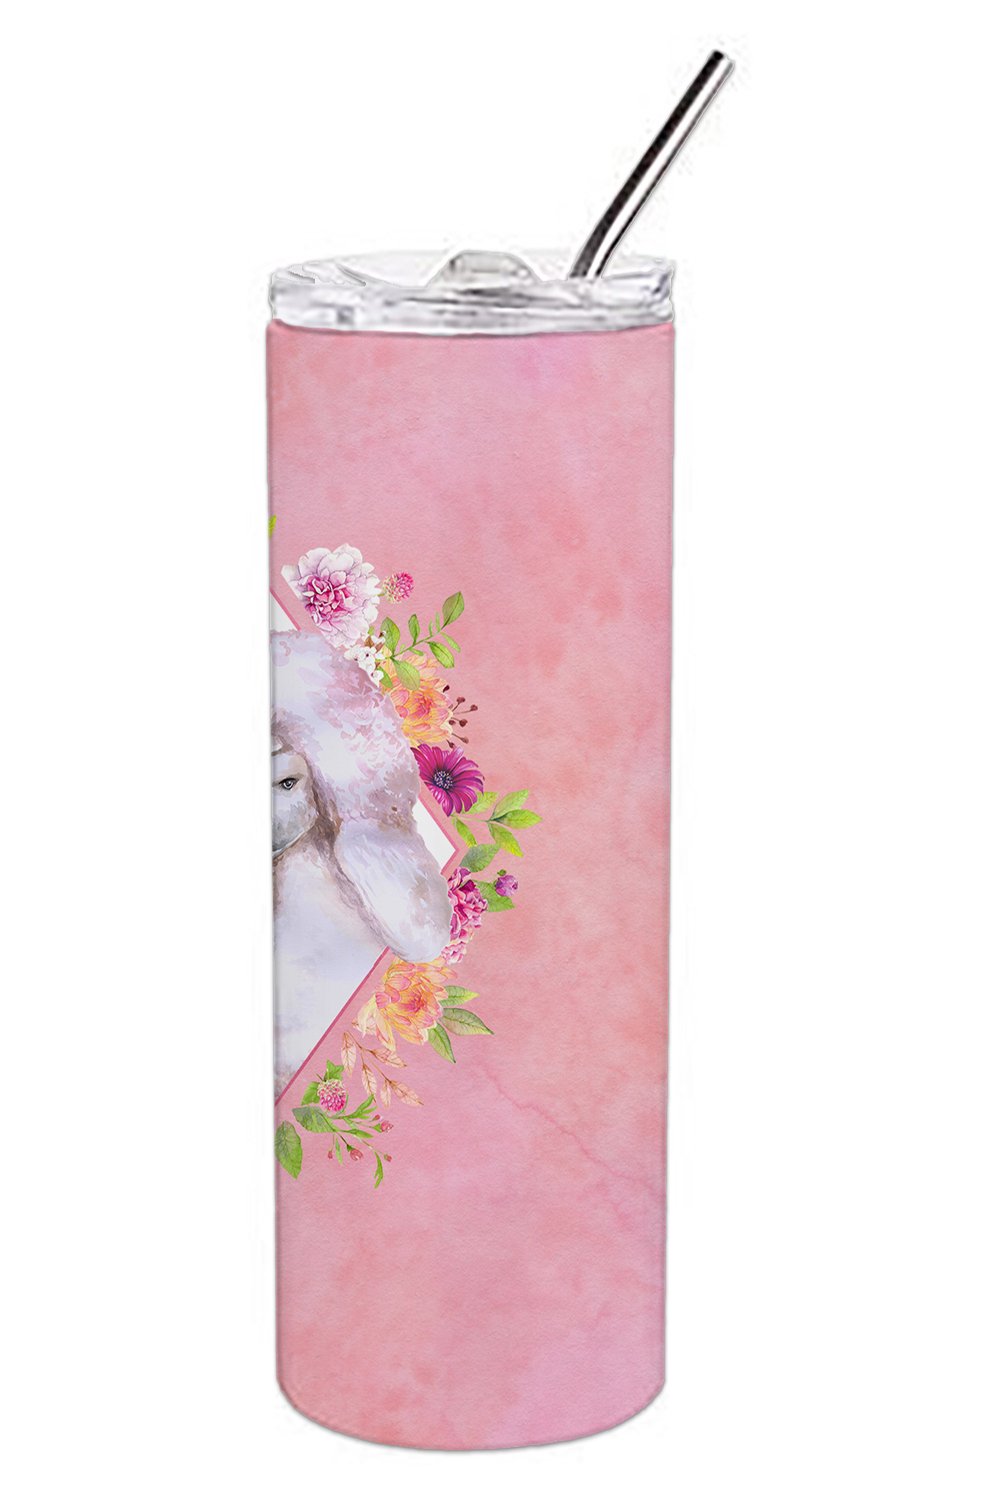 Standard White Poodle Pink Flowers Double Walled Stainless Steel 20 oz Skinny Tumbler CK4171TBL20 by Caroline's Treasures